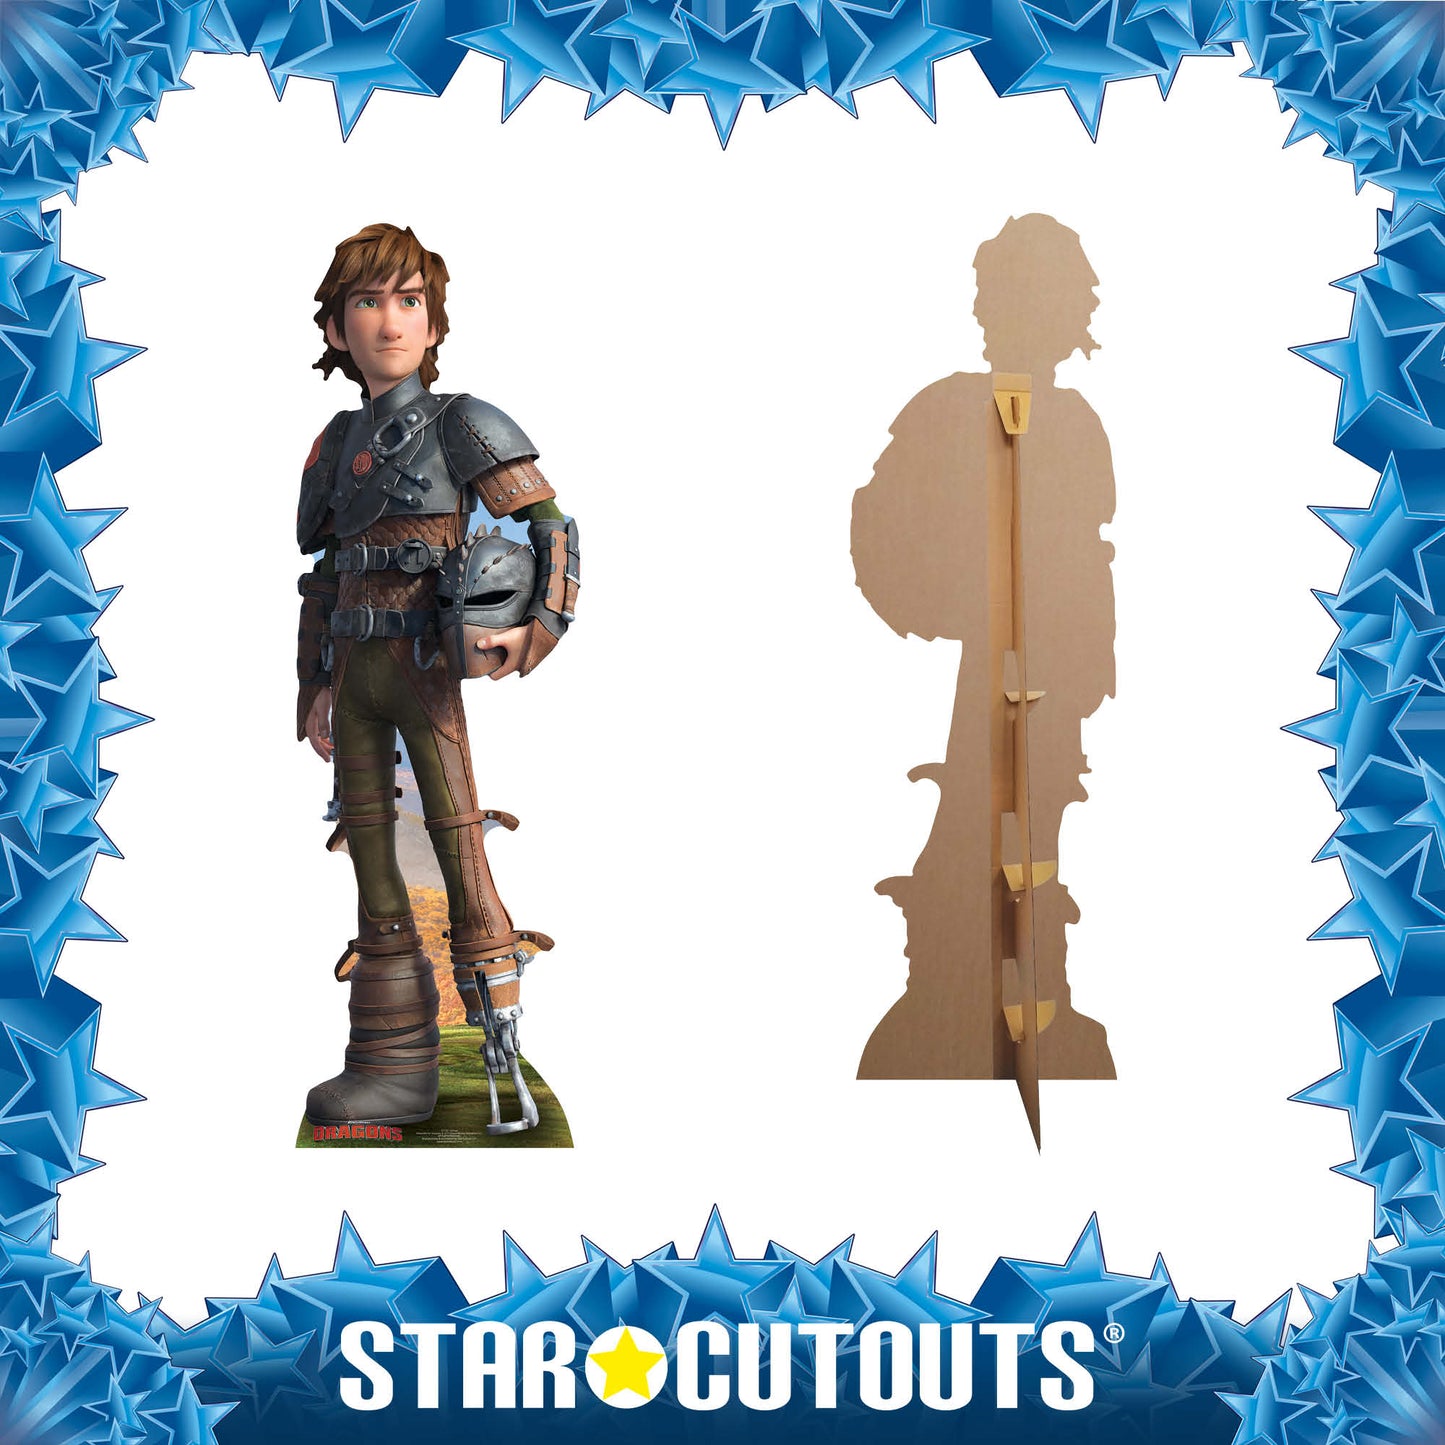 SC732 Hiccup Cardboard Cut Out Height 182cm